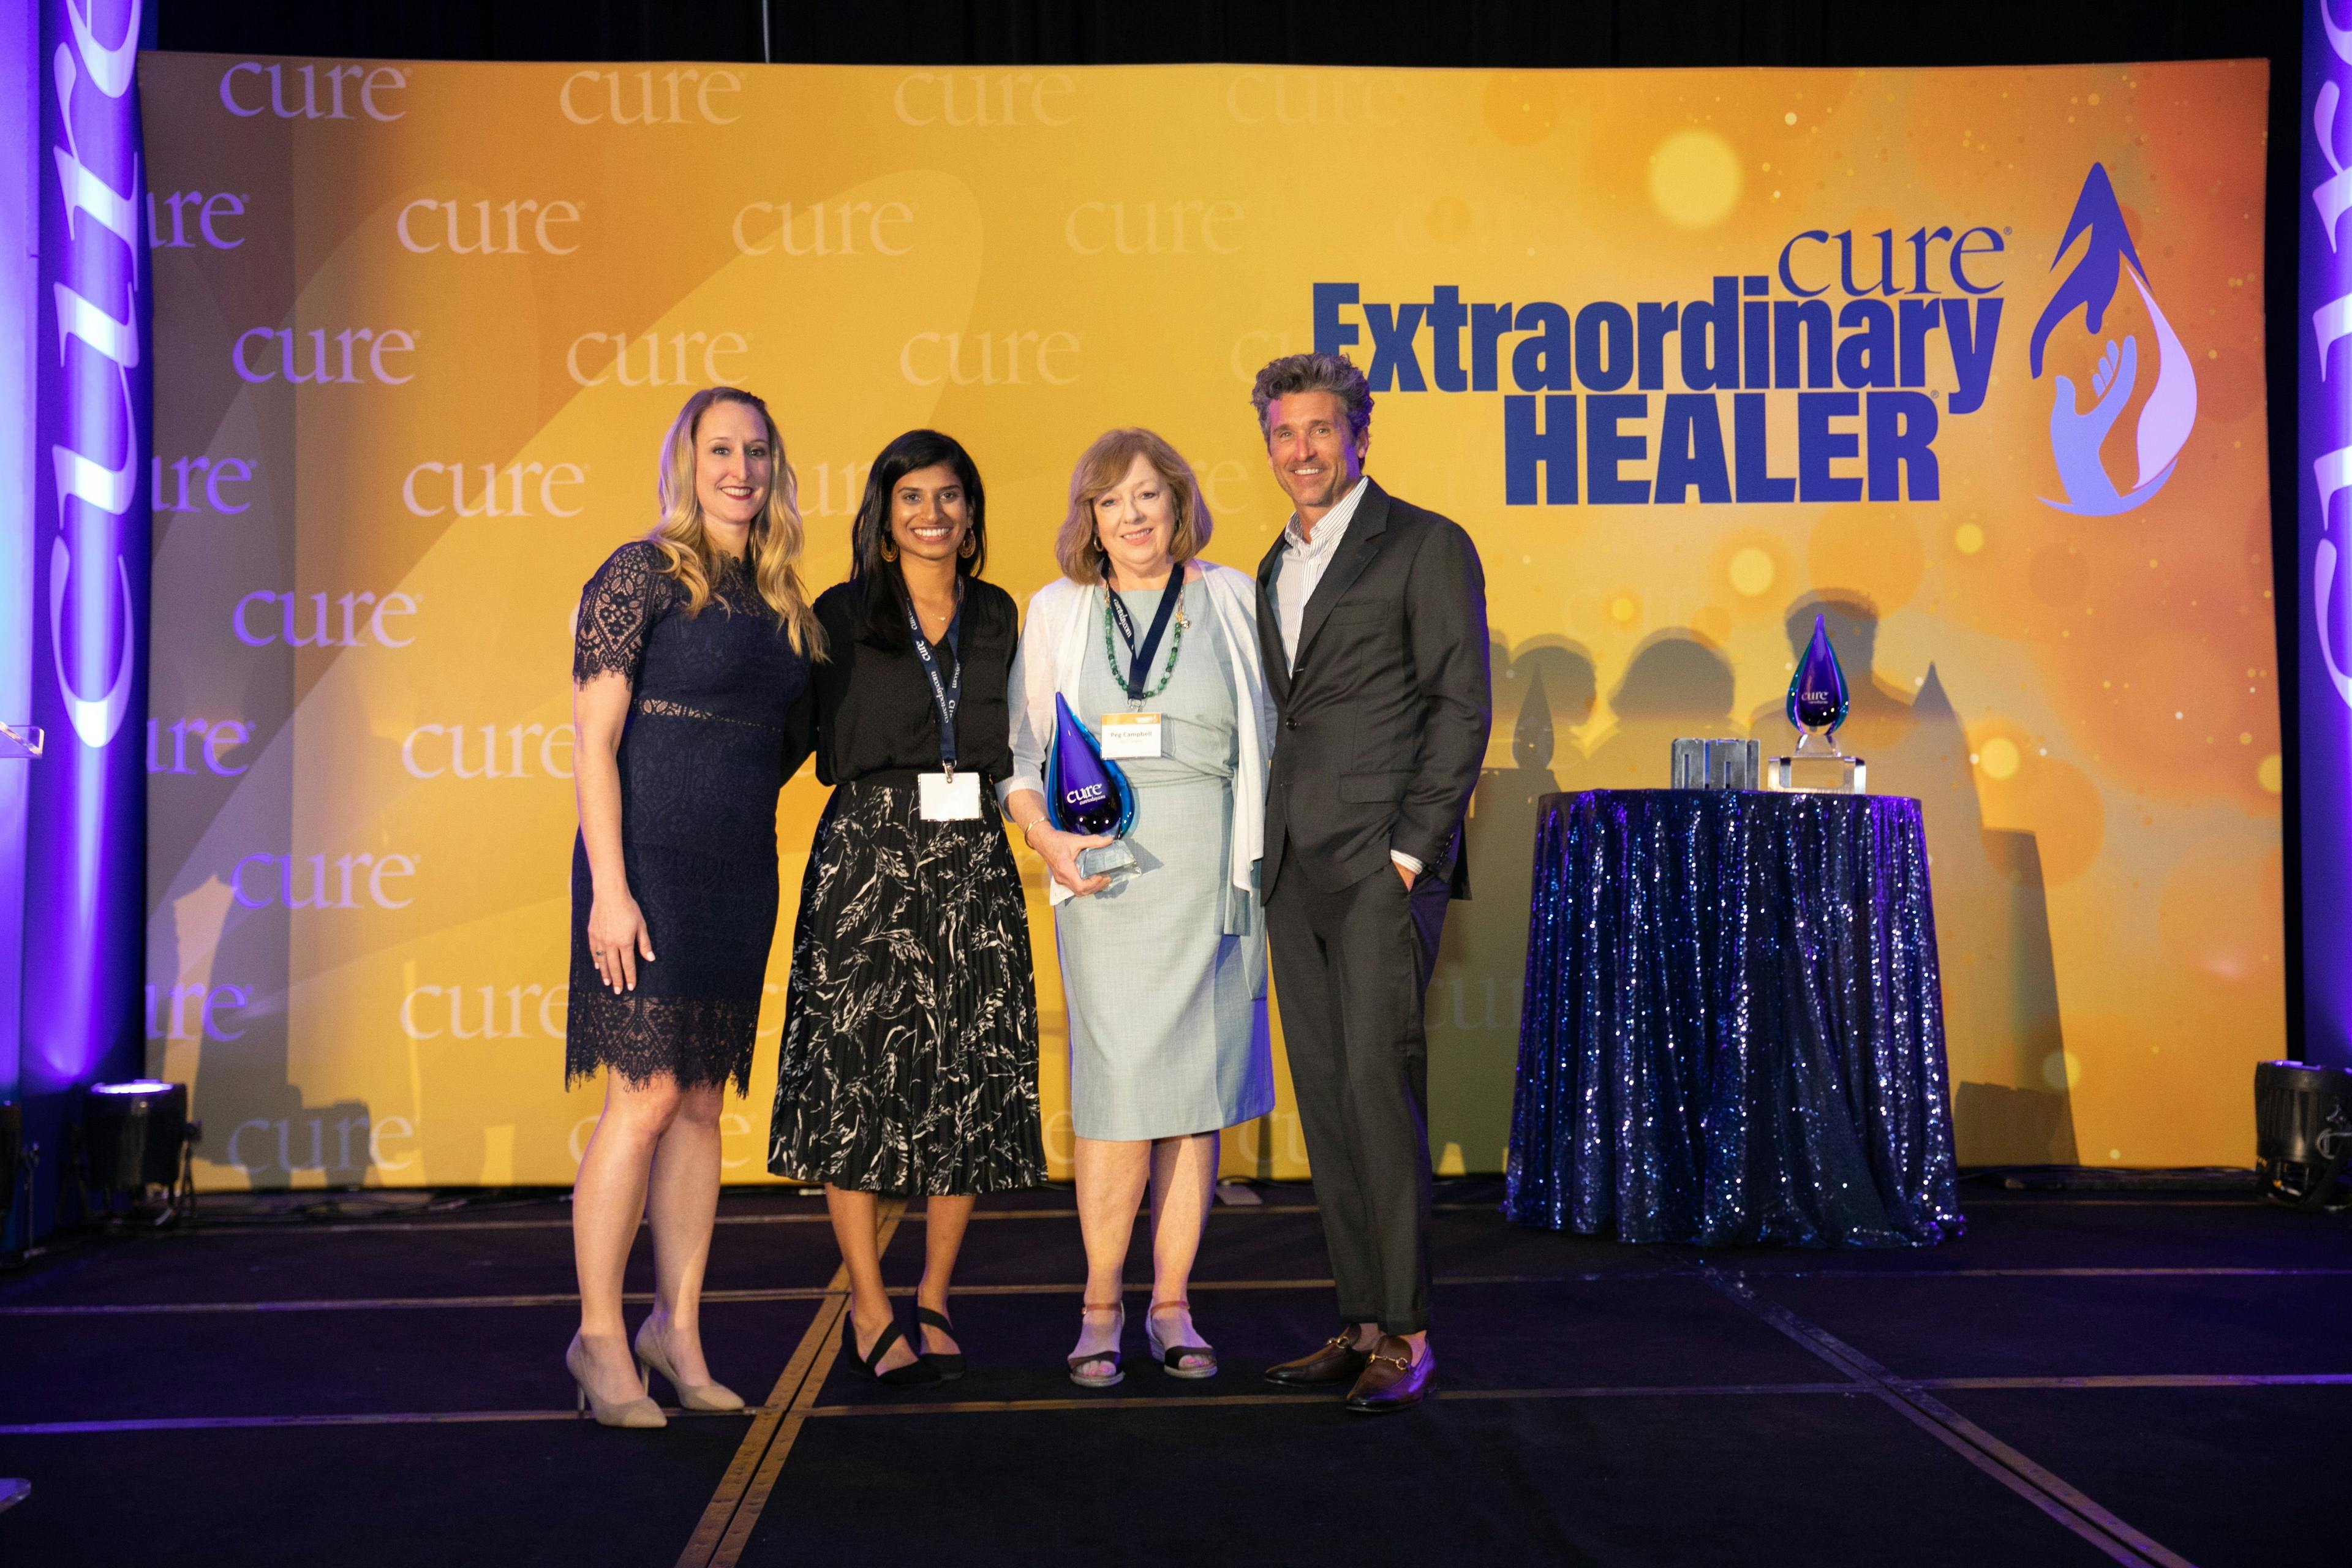 Margaret Campbell, B.S.N., RN, is joined by friend Nikita Patel, Kristie L. Kahl, vice president of content at MJH Life Sciences, and award-winning actor, producer and cancer advocate, Patrick Dempsey.

From left: Kristie Kahl, Nikita Patel, Margaret Campbell, B.S.N., RN, Patrick Dempsey. 